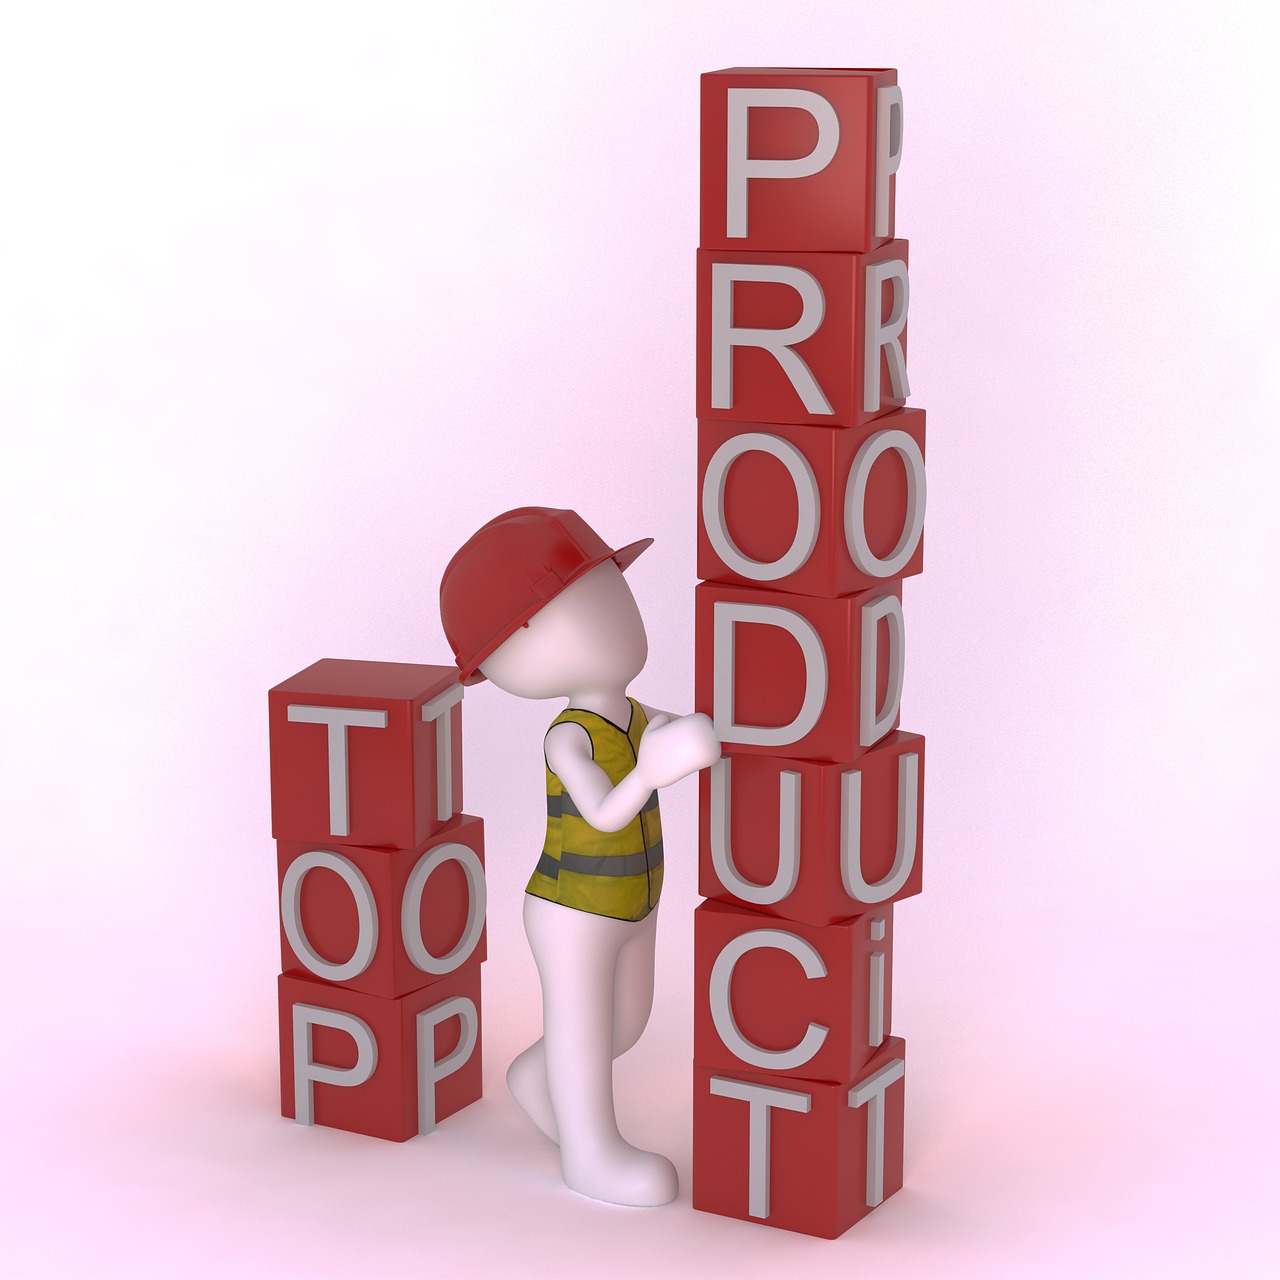 10 Product Management Myths Busted: What It’s Really Like!